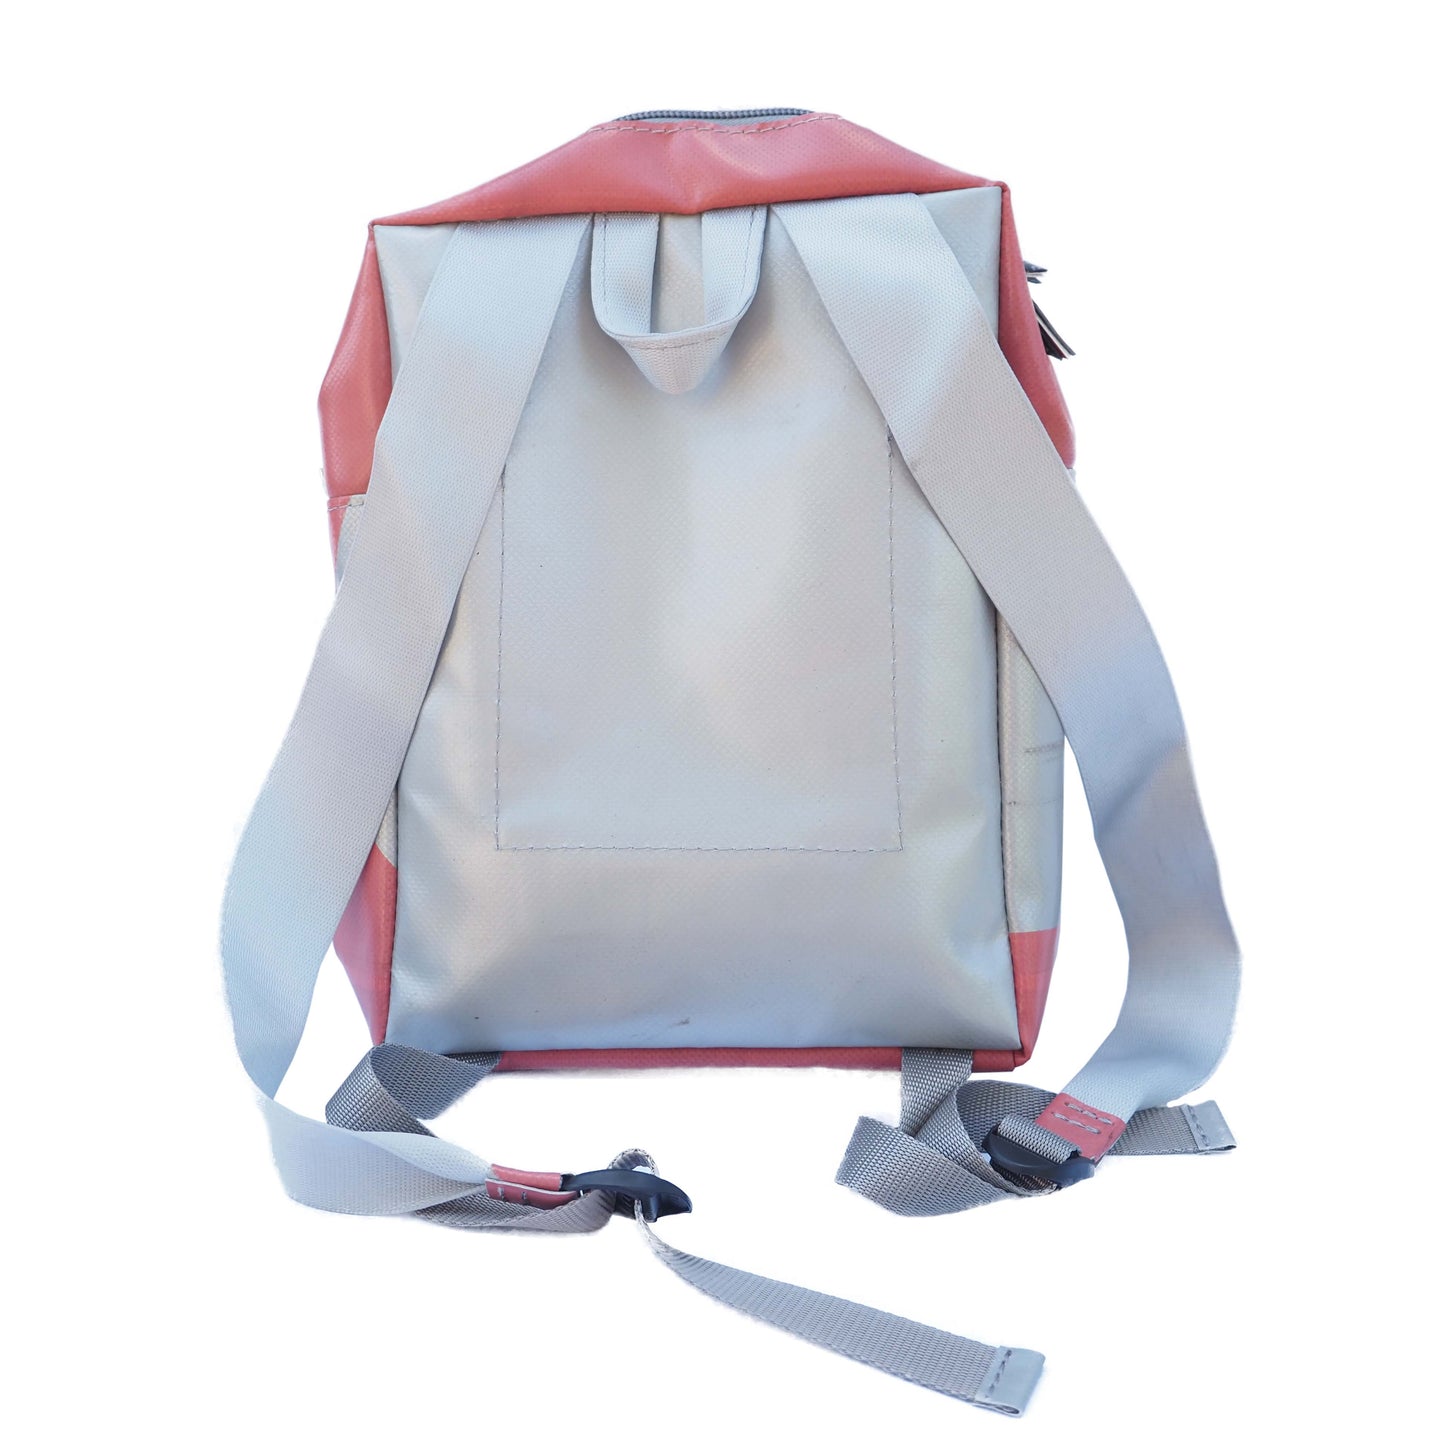 Backpack Silnice | Red, Gray